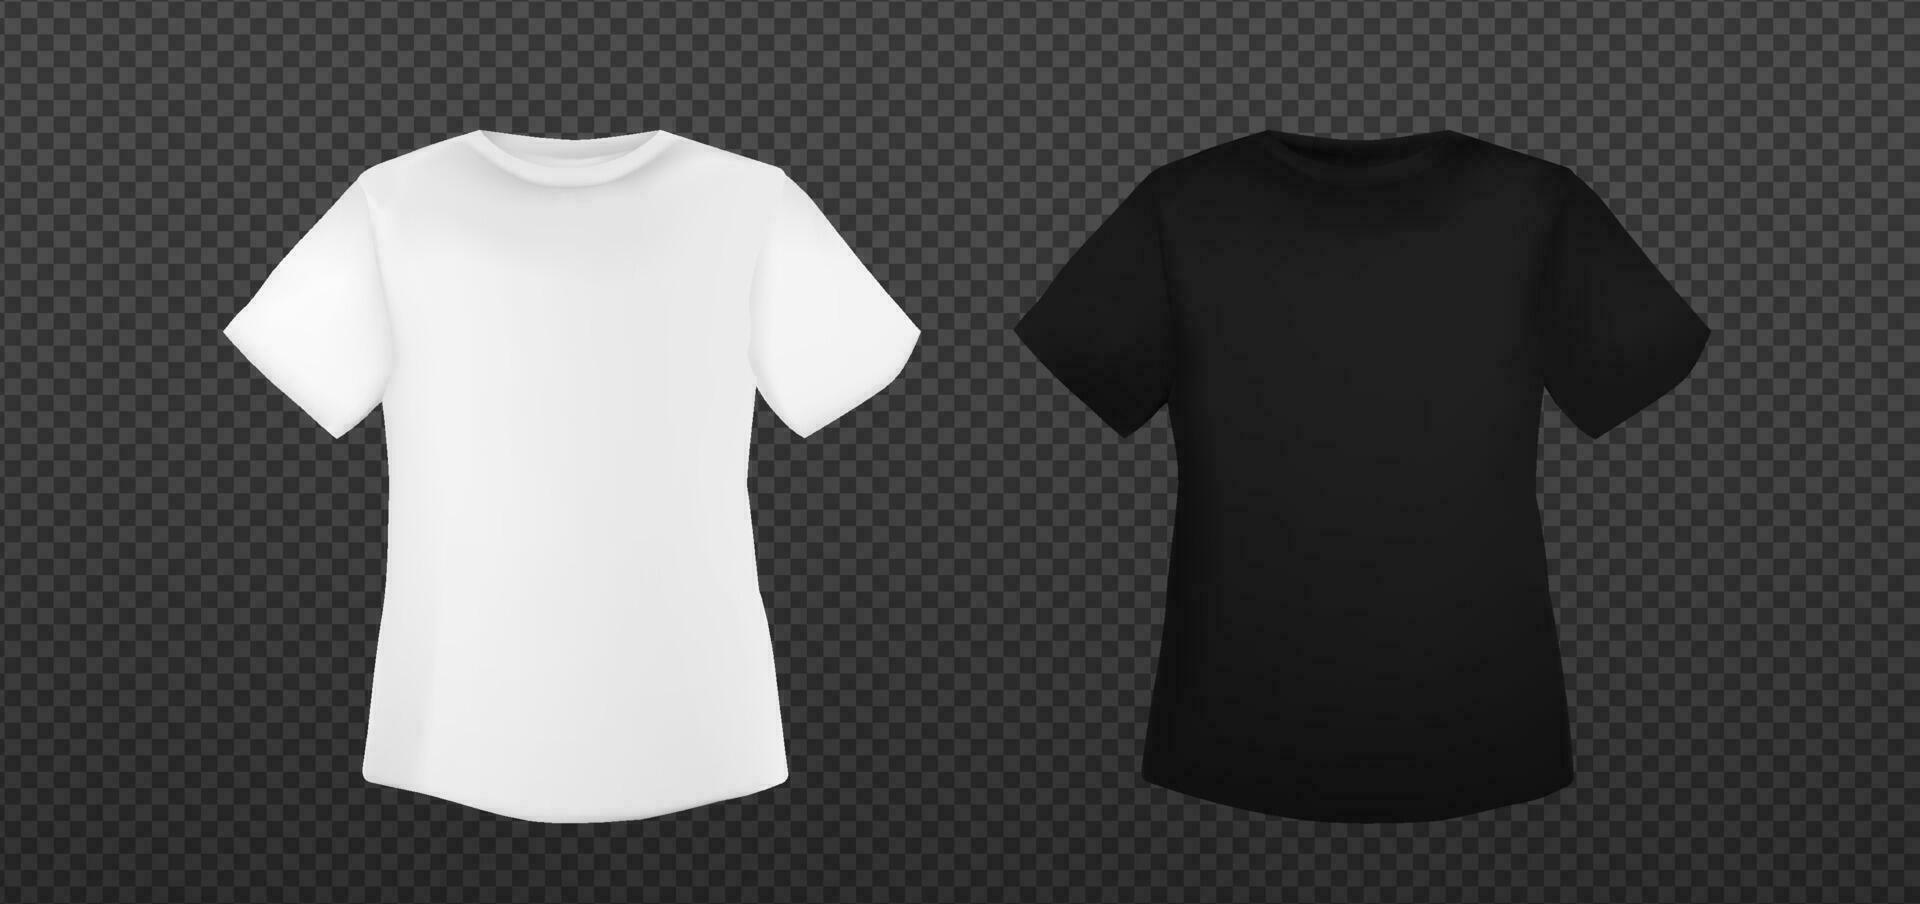 White and black oversize tshirt template.  T shirt mockup blank vector